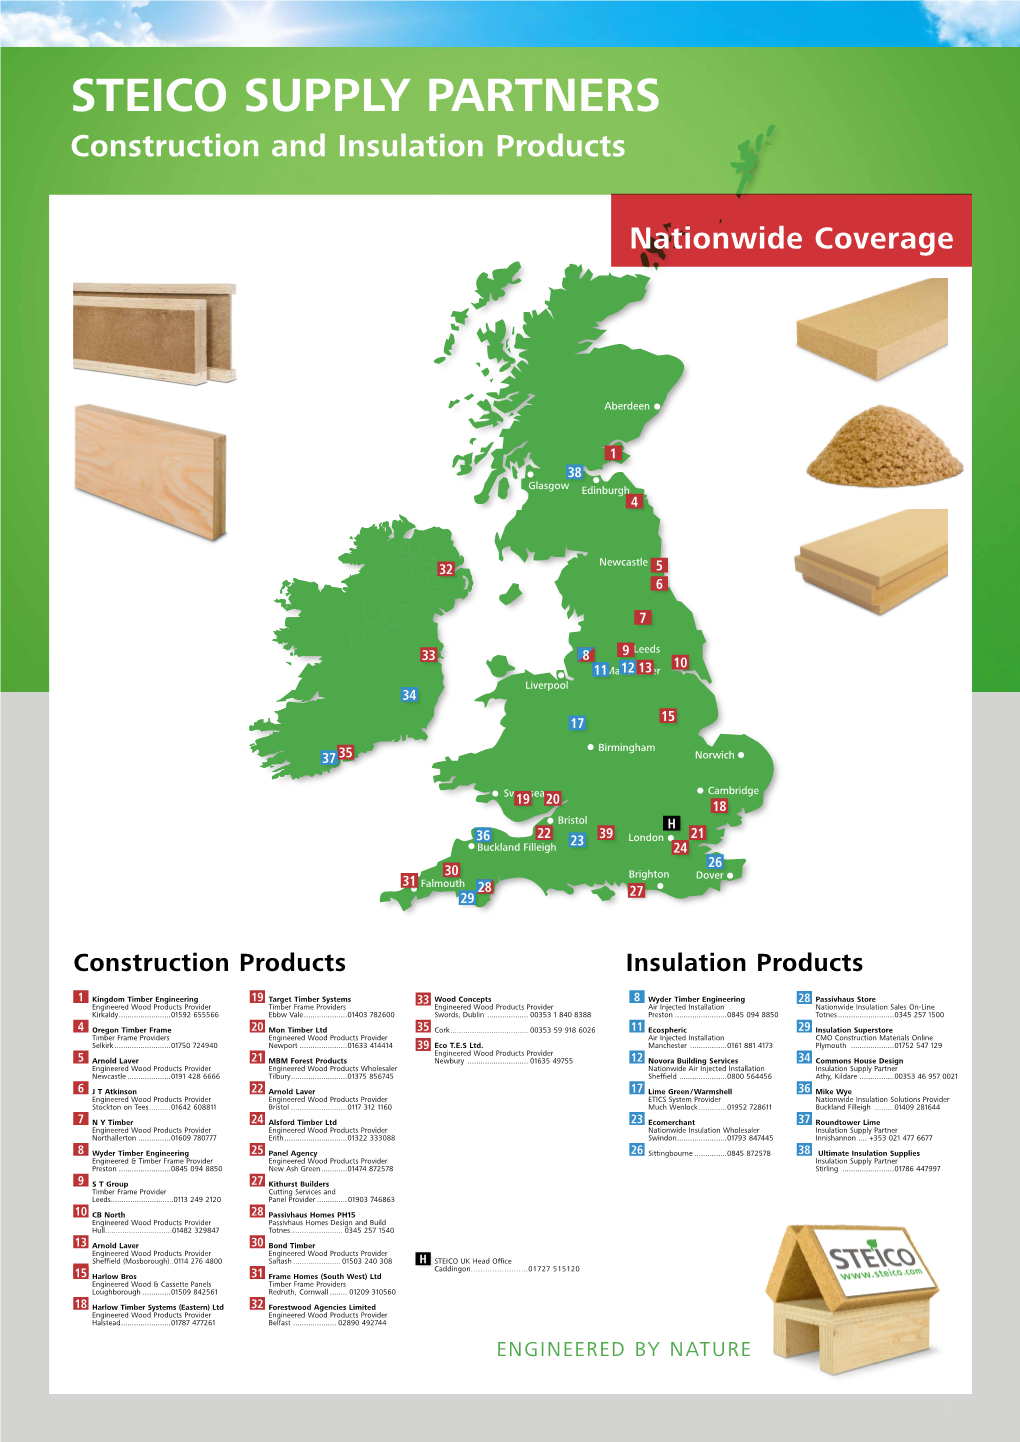 Construction and Insulation Products